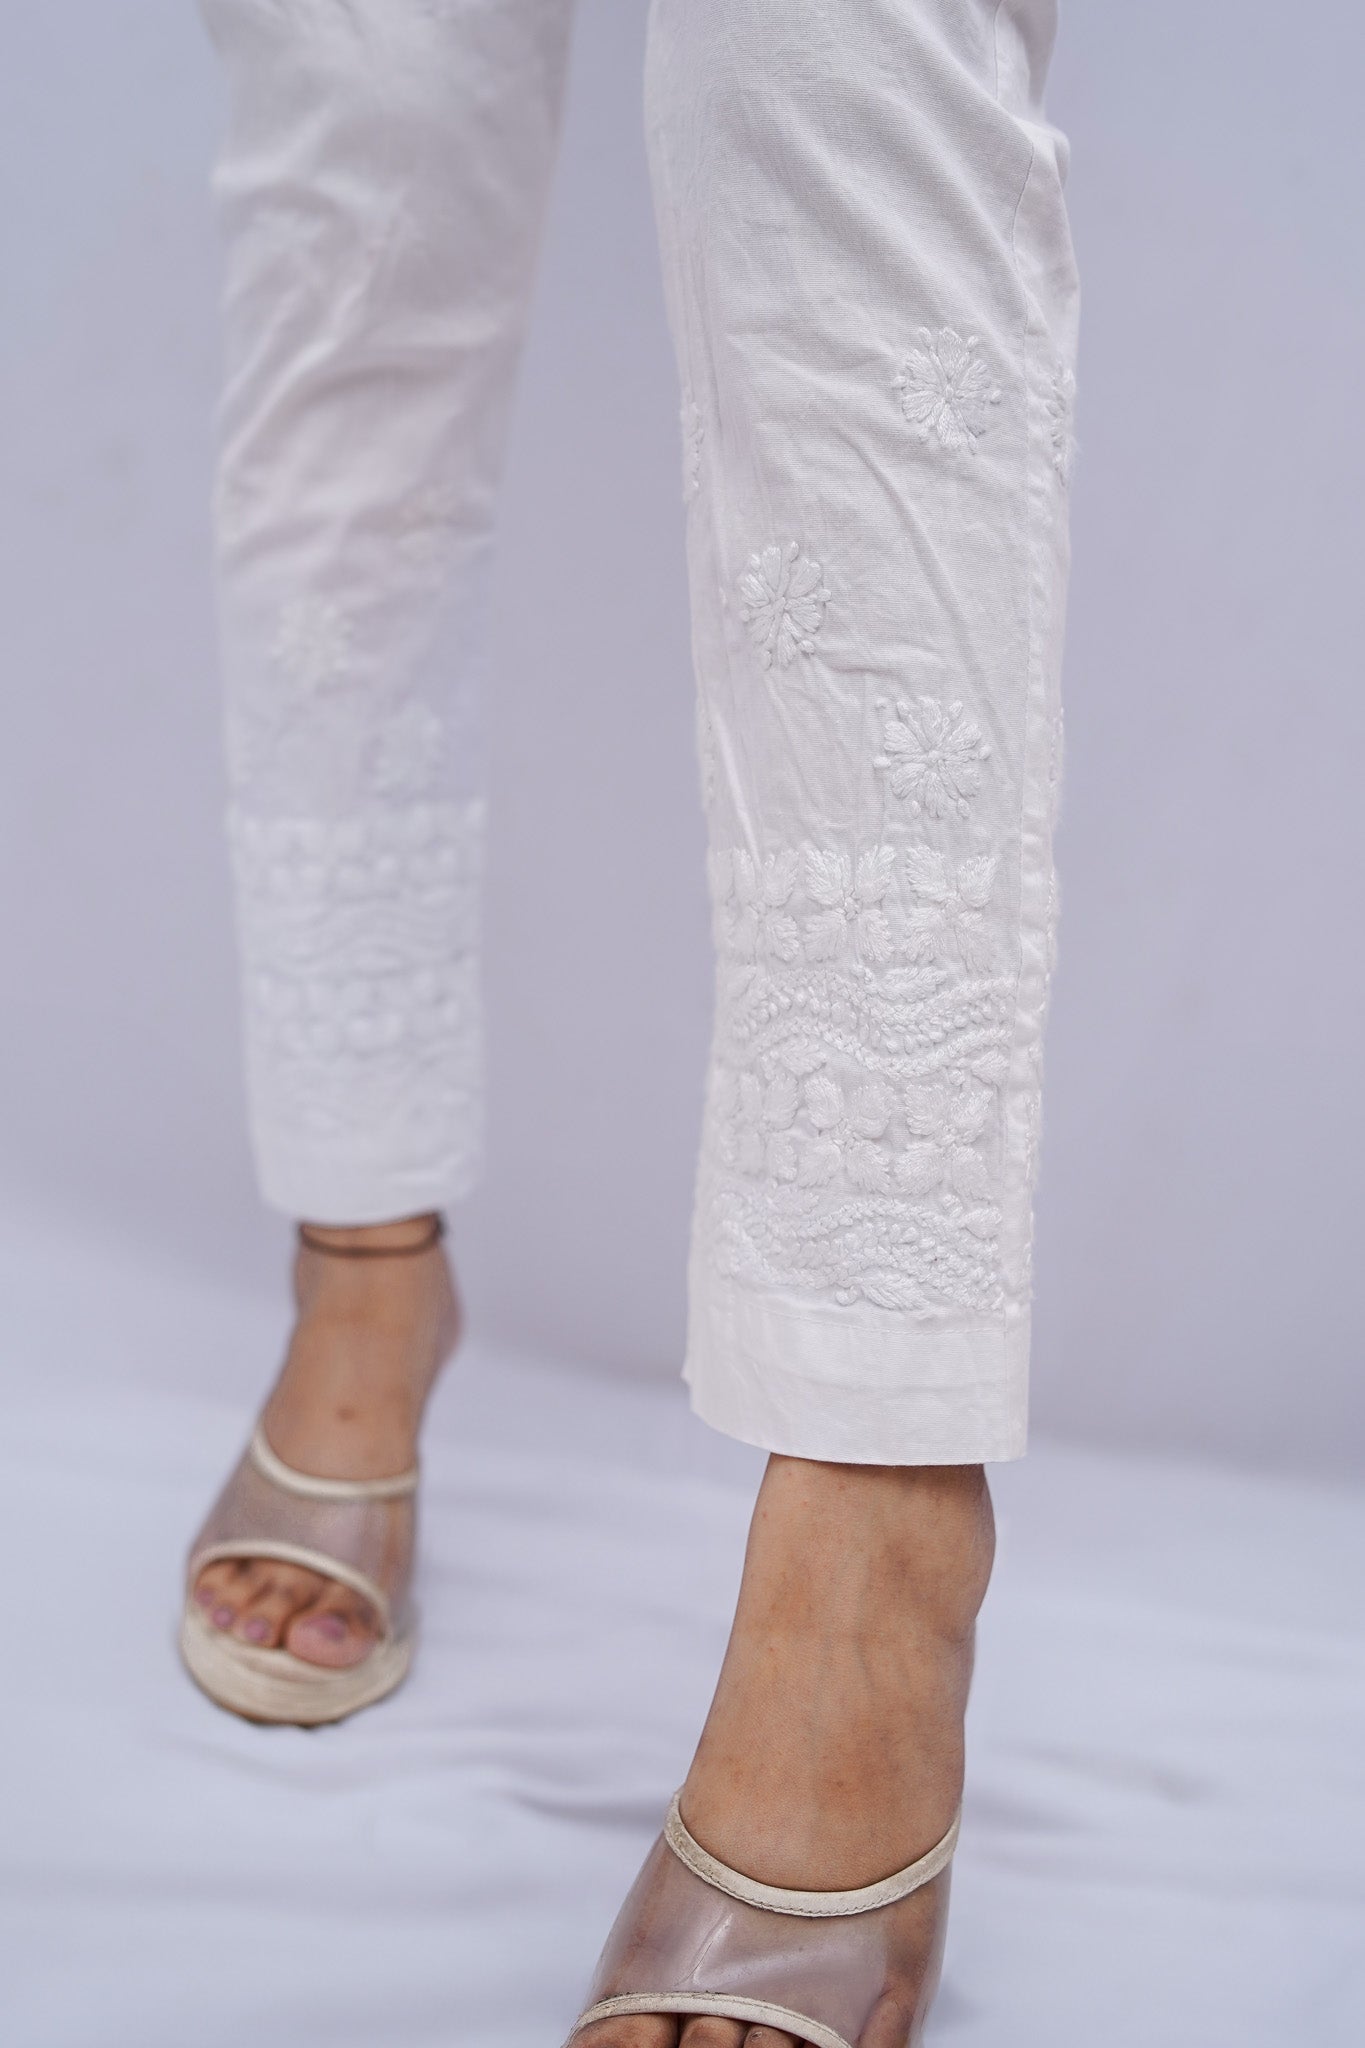 Buy SRI SHYAM CHIKAN Lycra Stretchable Pant Hand Embroidered White Palazzo  Pants for Womens at Amazon.in